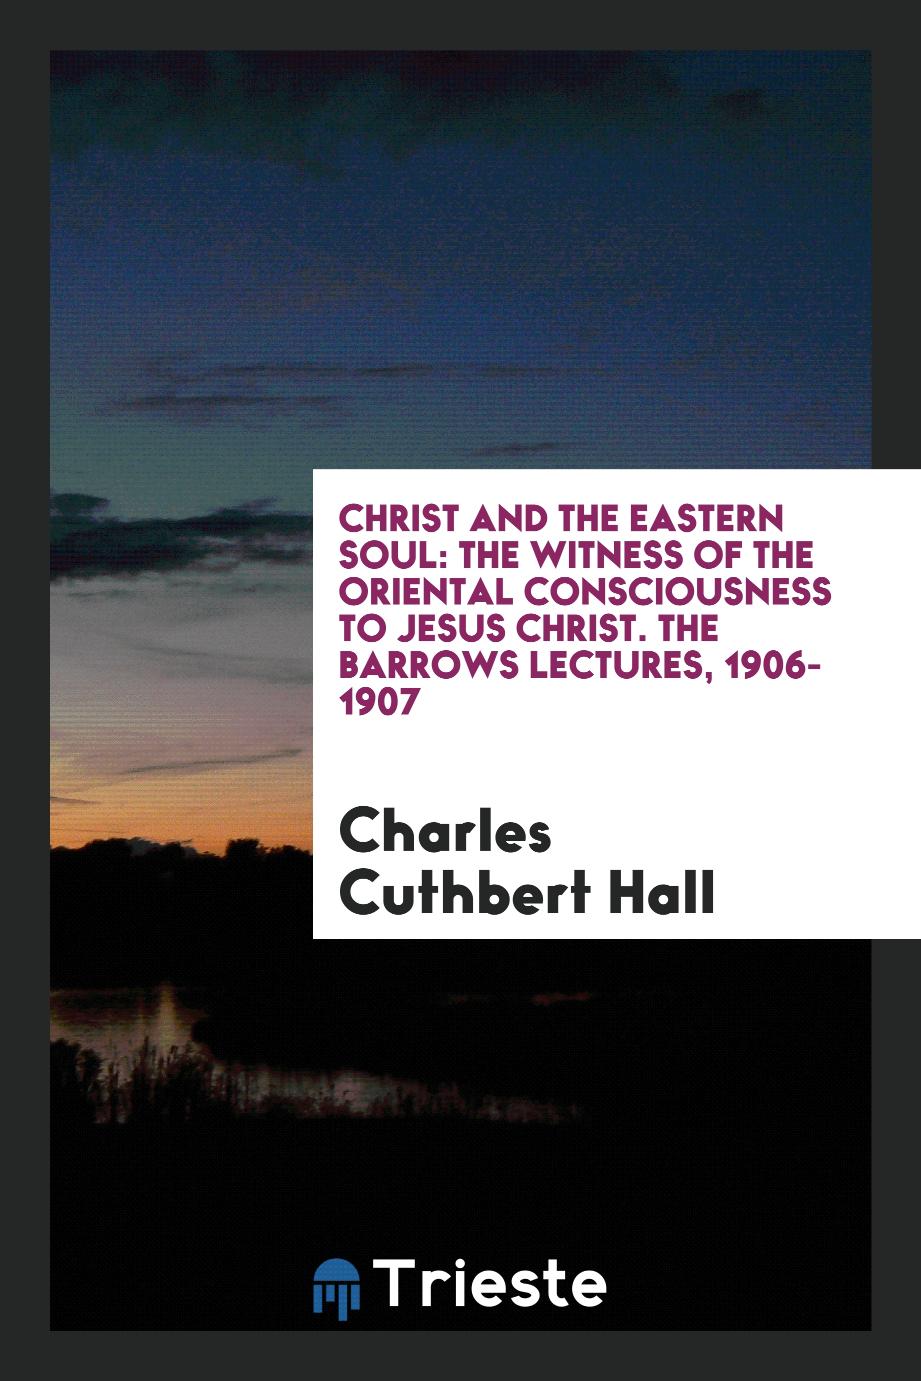 Christ and the eastern soul: the witness of the oriental consciousness to Jesus Christ. The Barrows lectures, 1906-1907